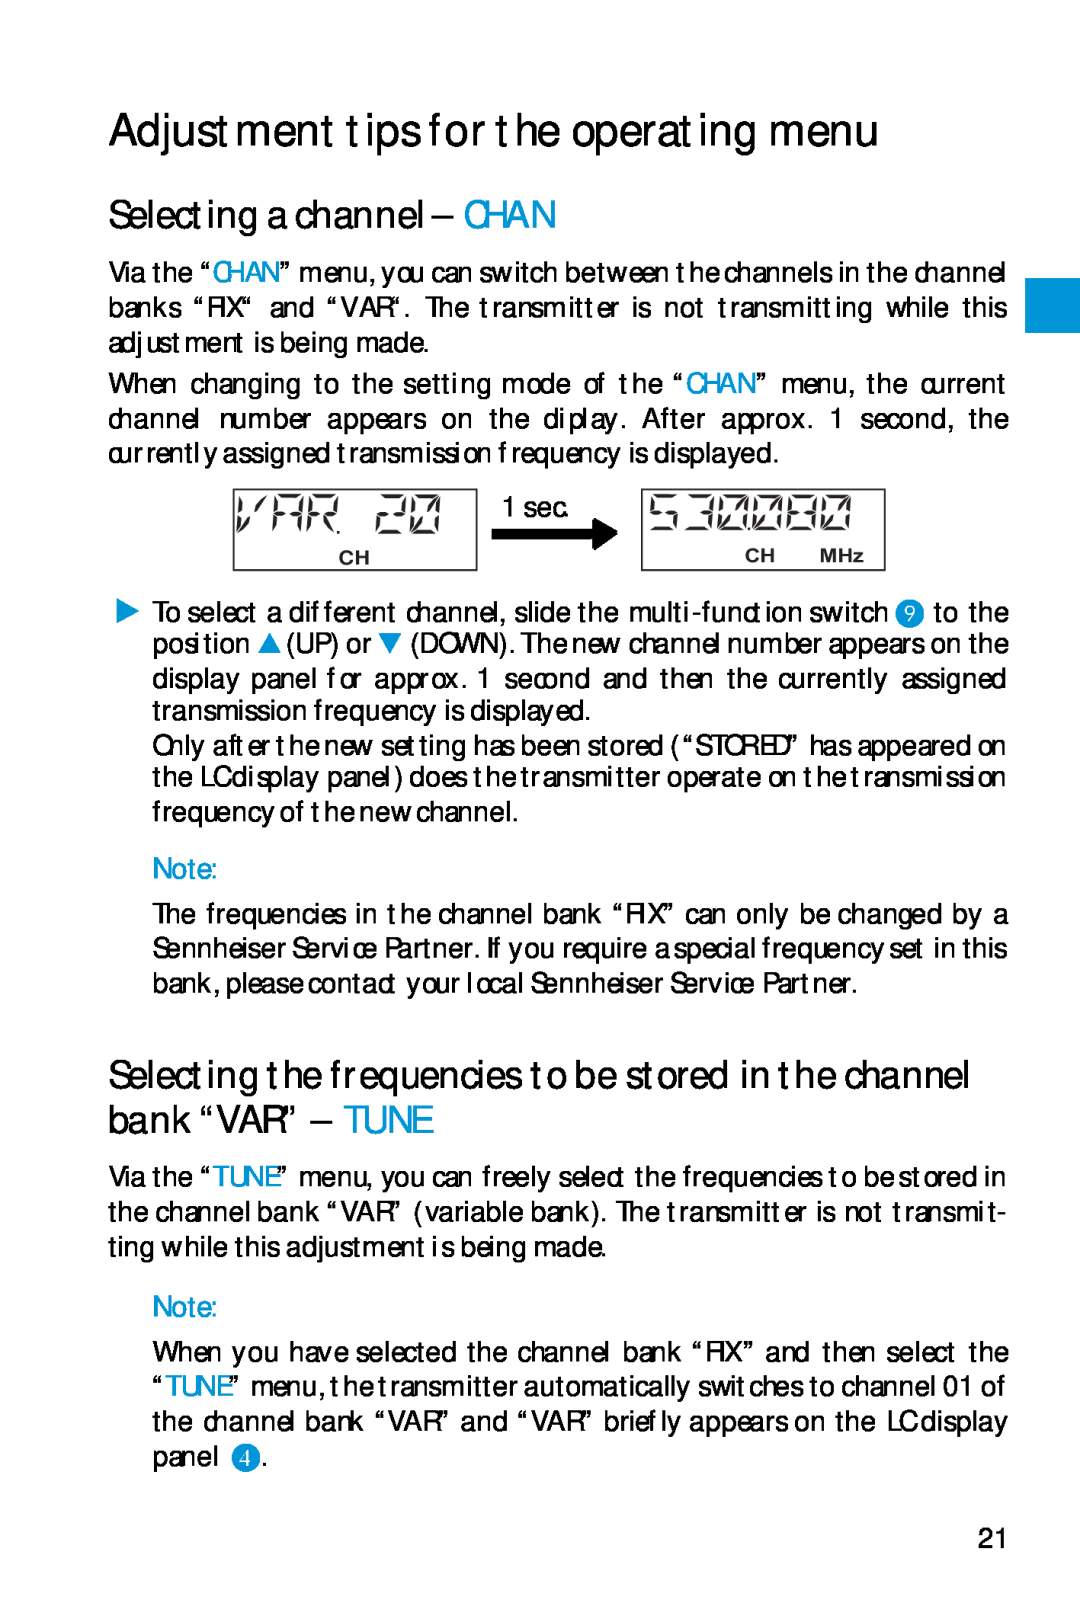 Sennheiser SK 5212 manual Adjustment tips for the operating menu, Selecting a channel - CHAN 